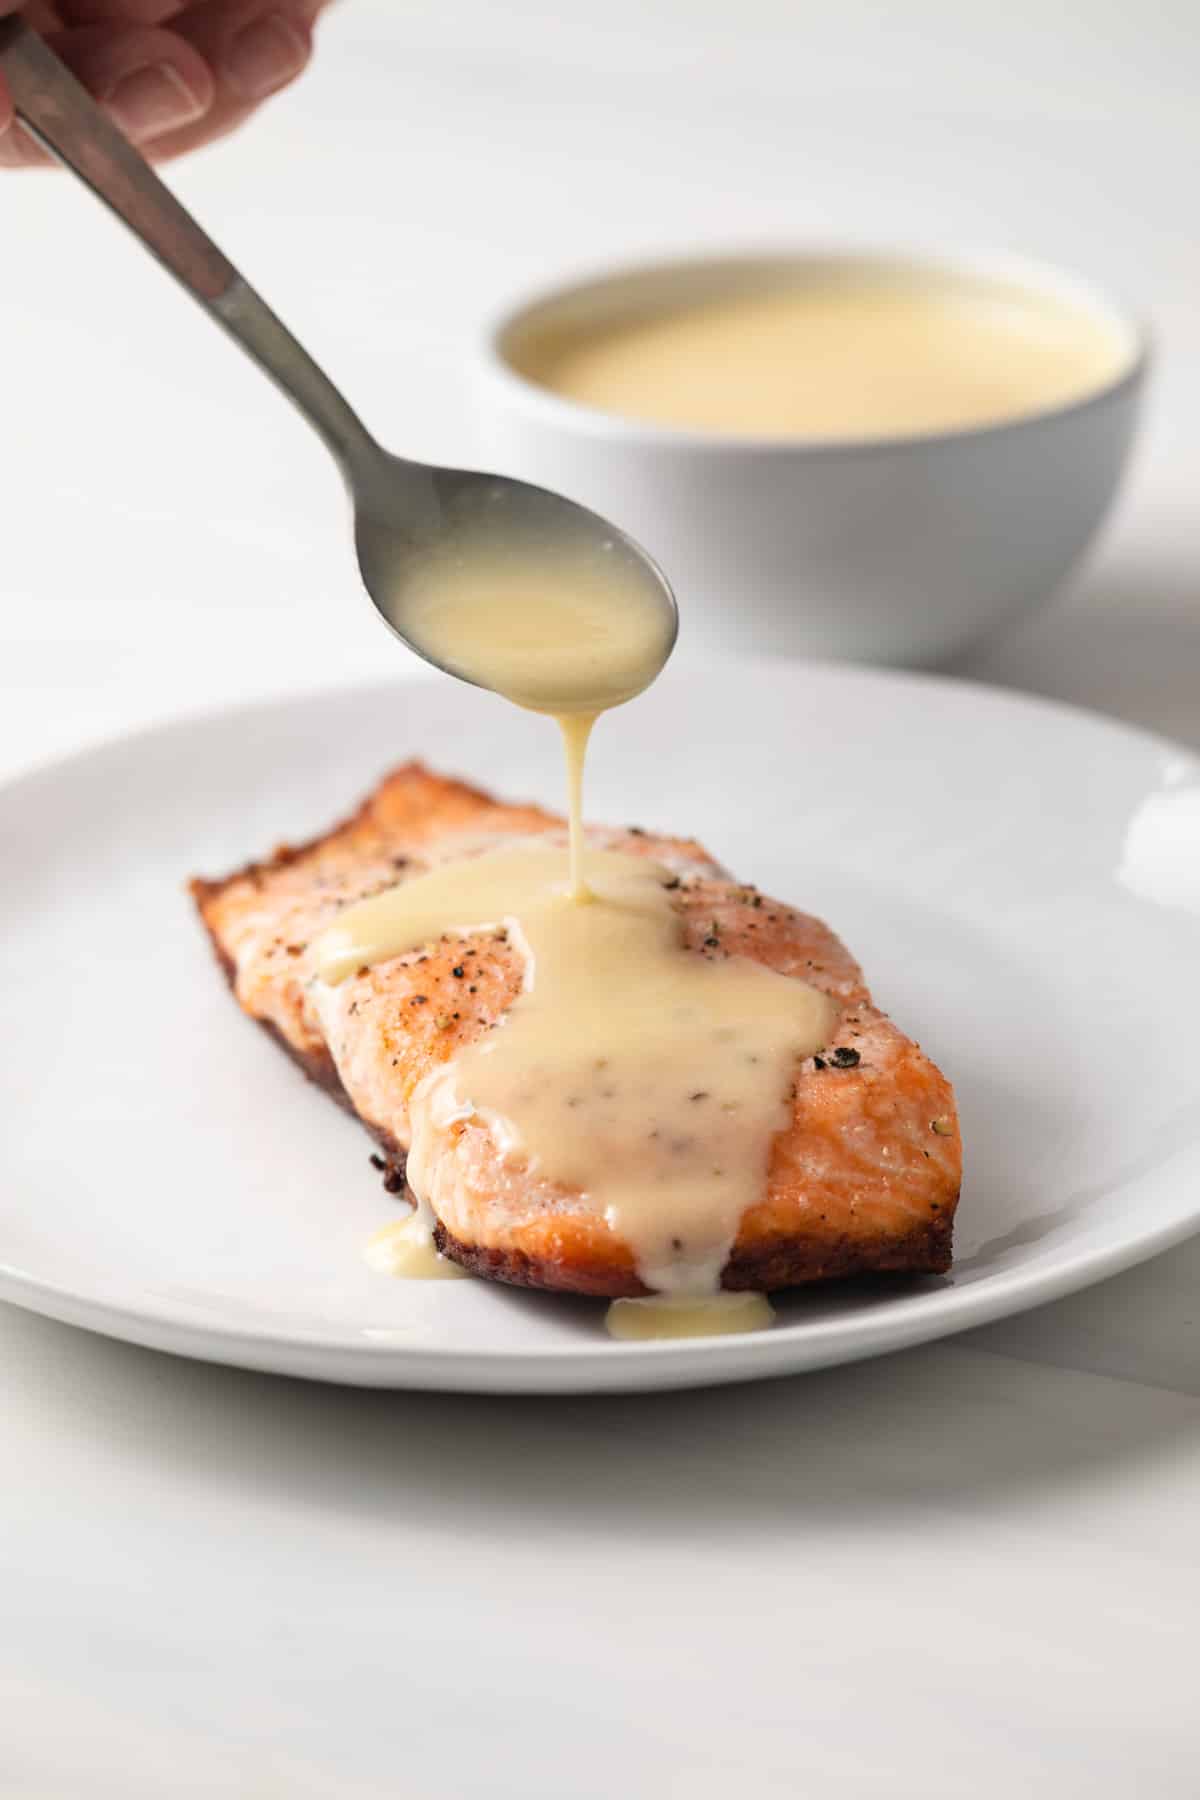 Beurre blanc sauce spooned over salmon.